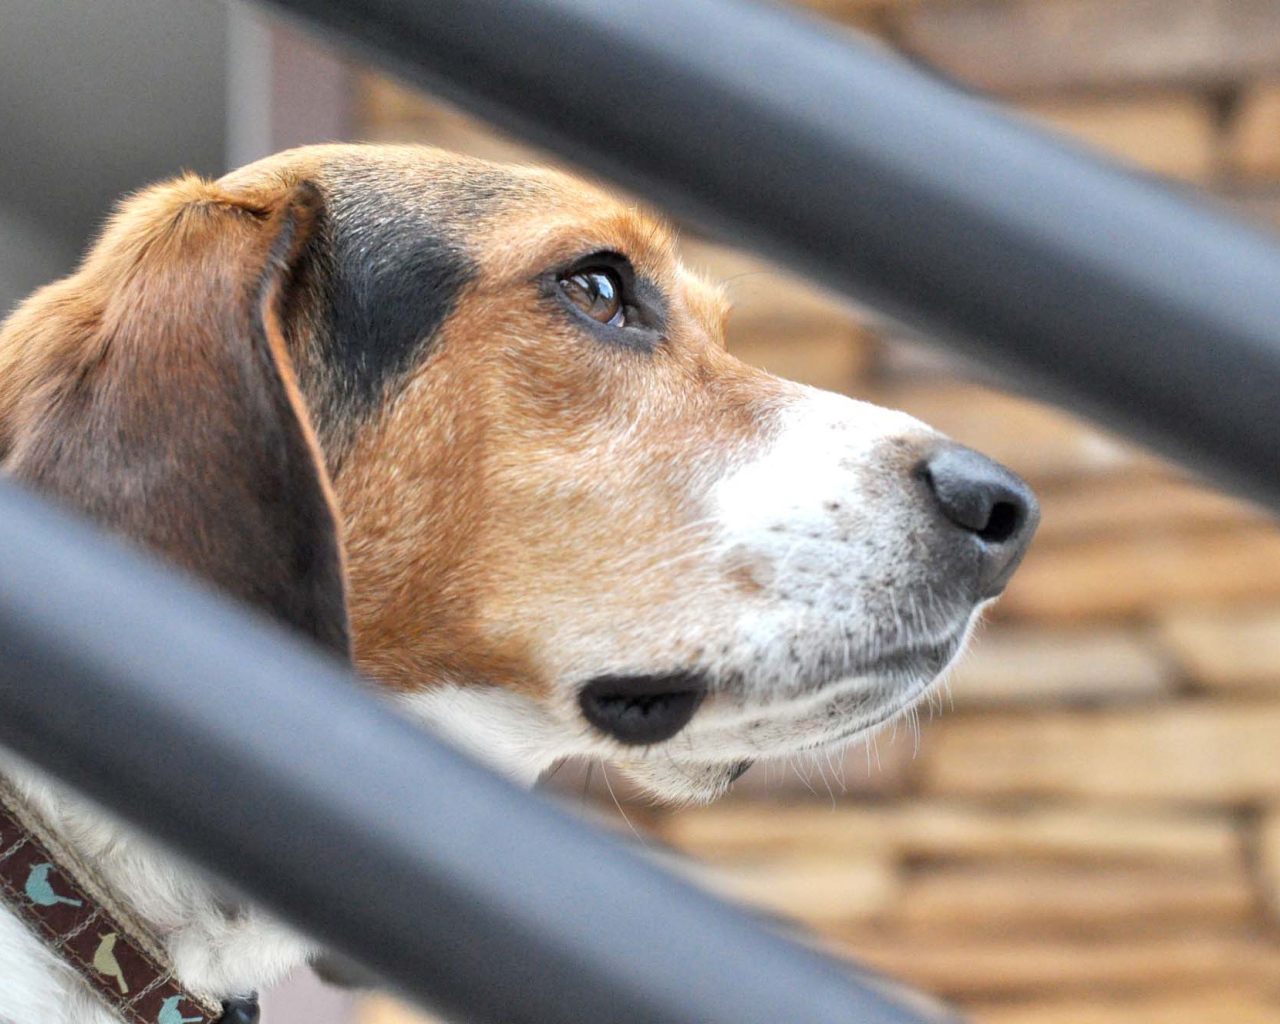 Beagle dog lost in thought about something